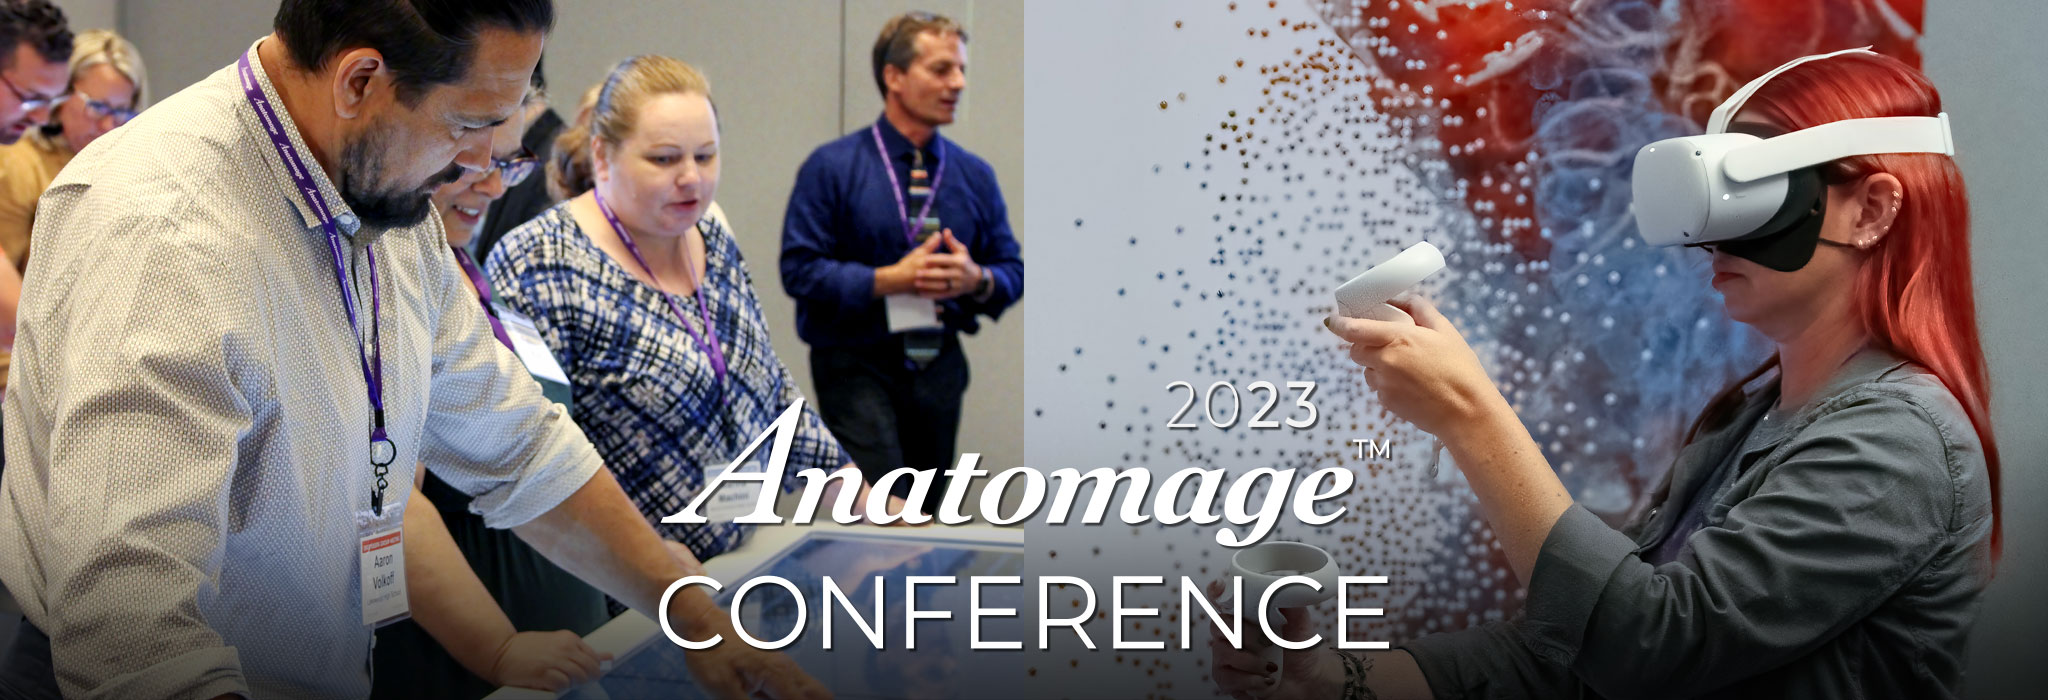 Anatomage Conference 2023